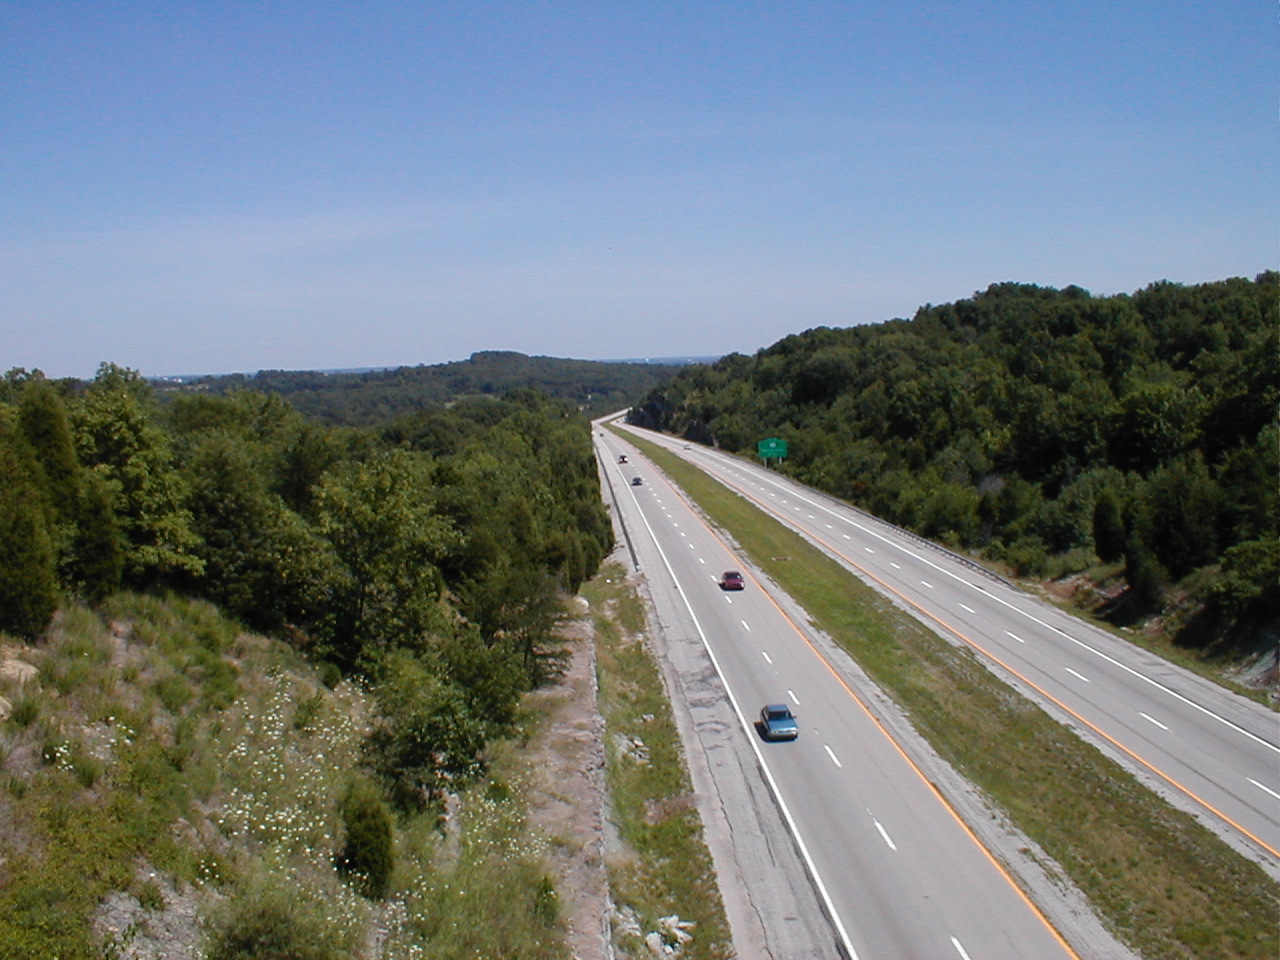 From the top of the bridge looking south over the parkway.